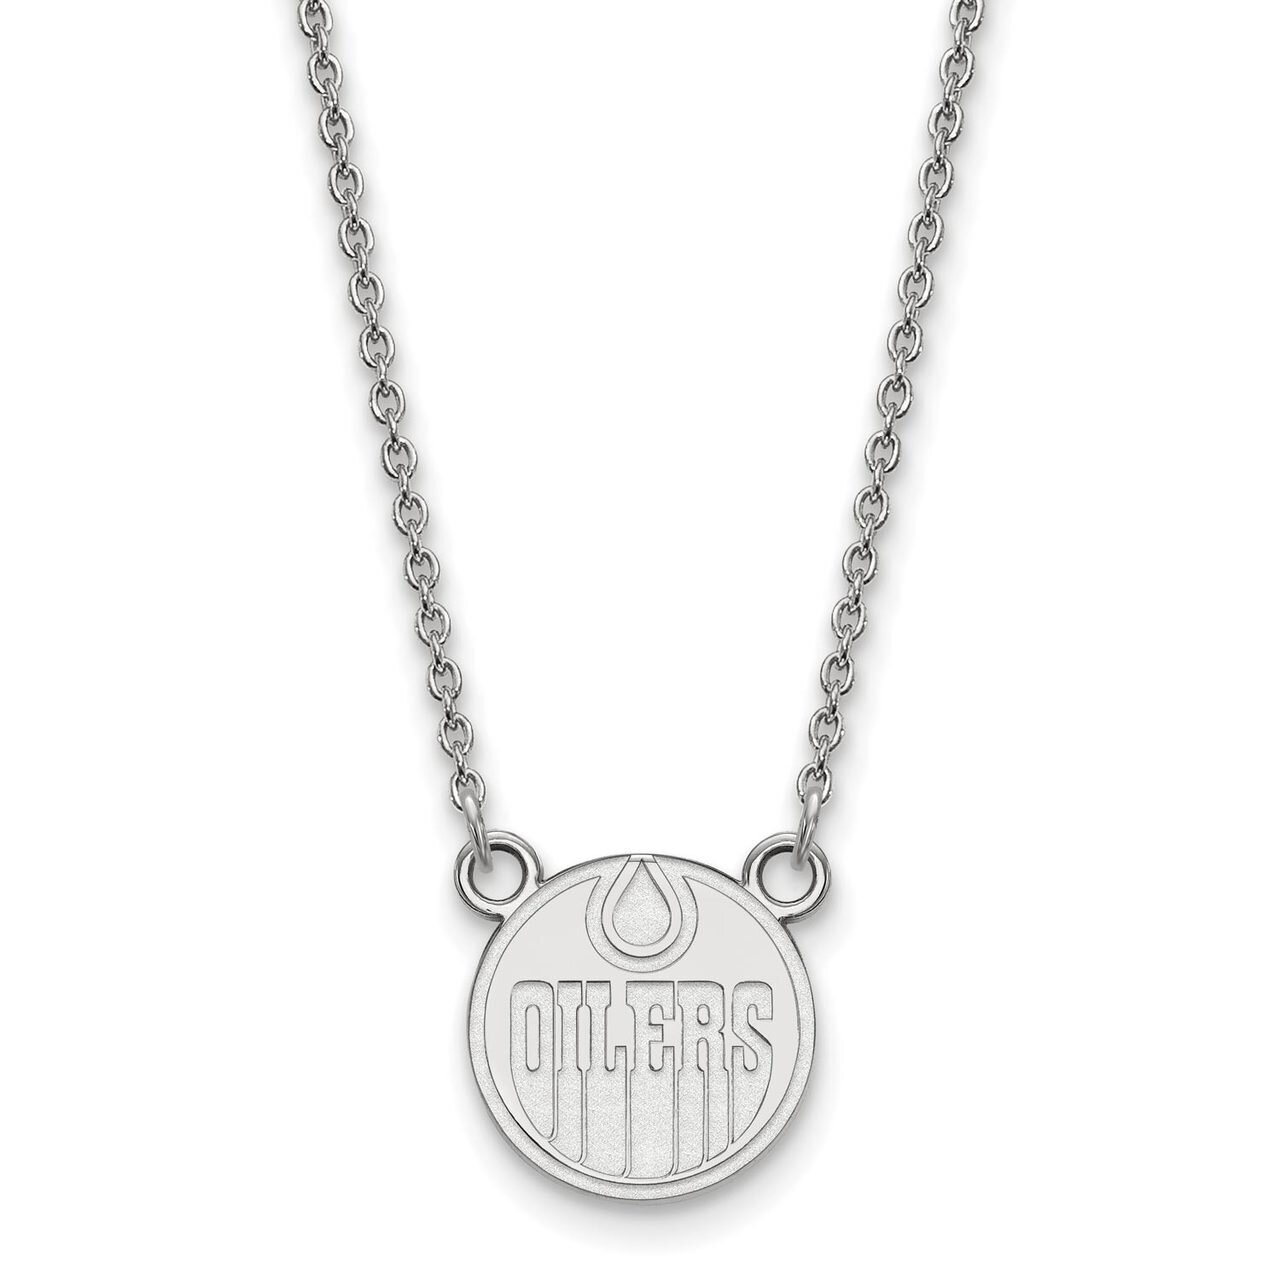 Edmonton Oilers Small Pendant with Chain Necklace 14k White Gold 4W007OIL-18